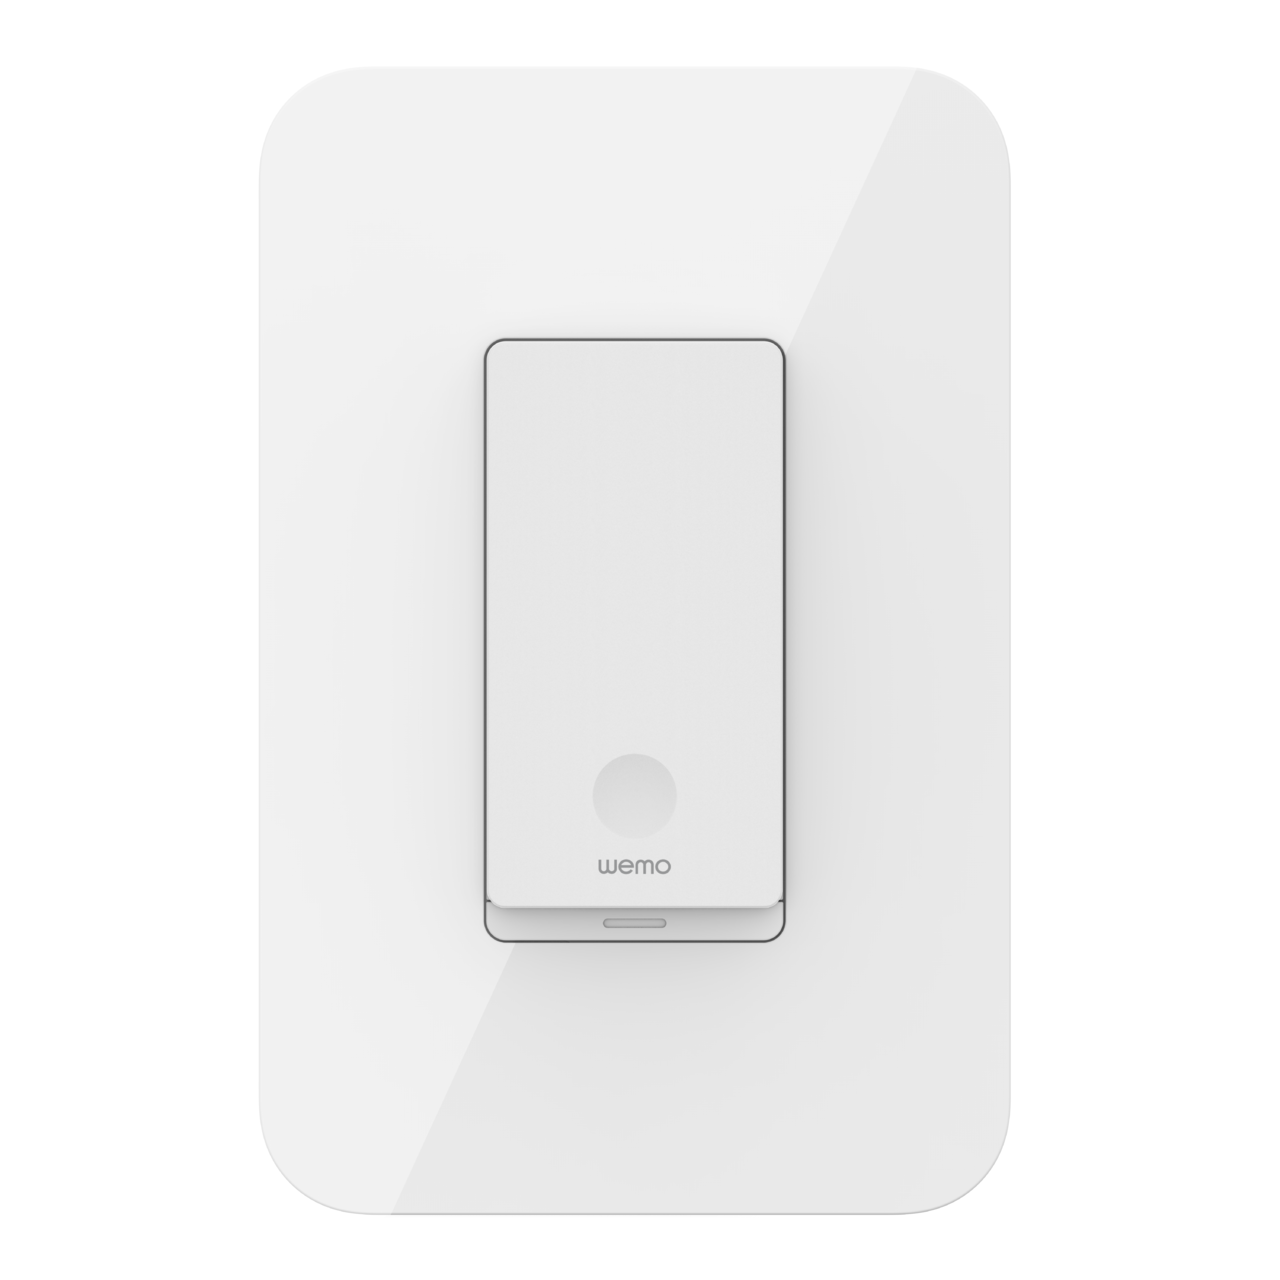 Belkin WeMo Smart Home Automation Switch review - The Gadgeteer